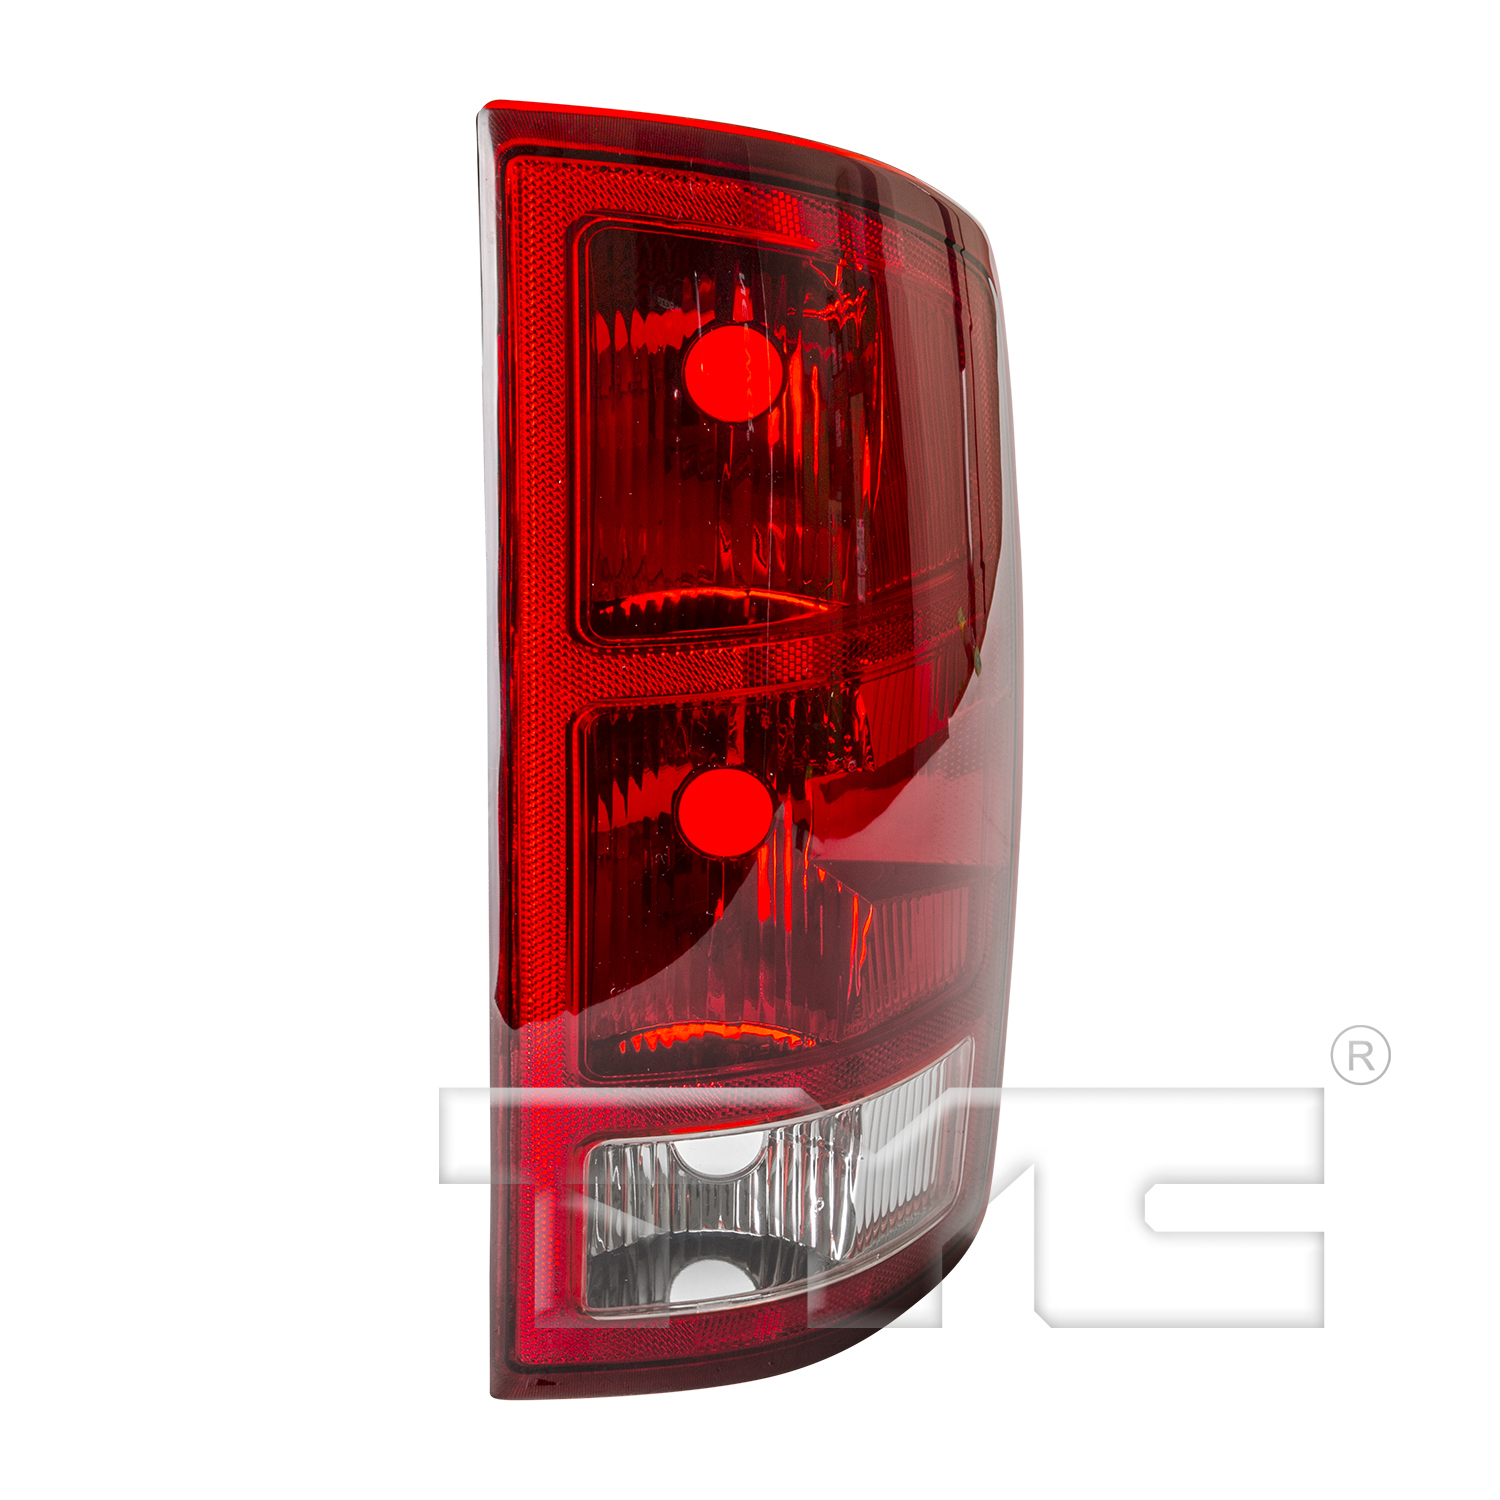 Aftermarket TAILLIGHTS for DODGE - RAM 1500, RAM 1500,02-06,RT Taillamp assy